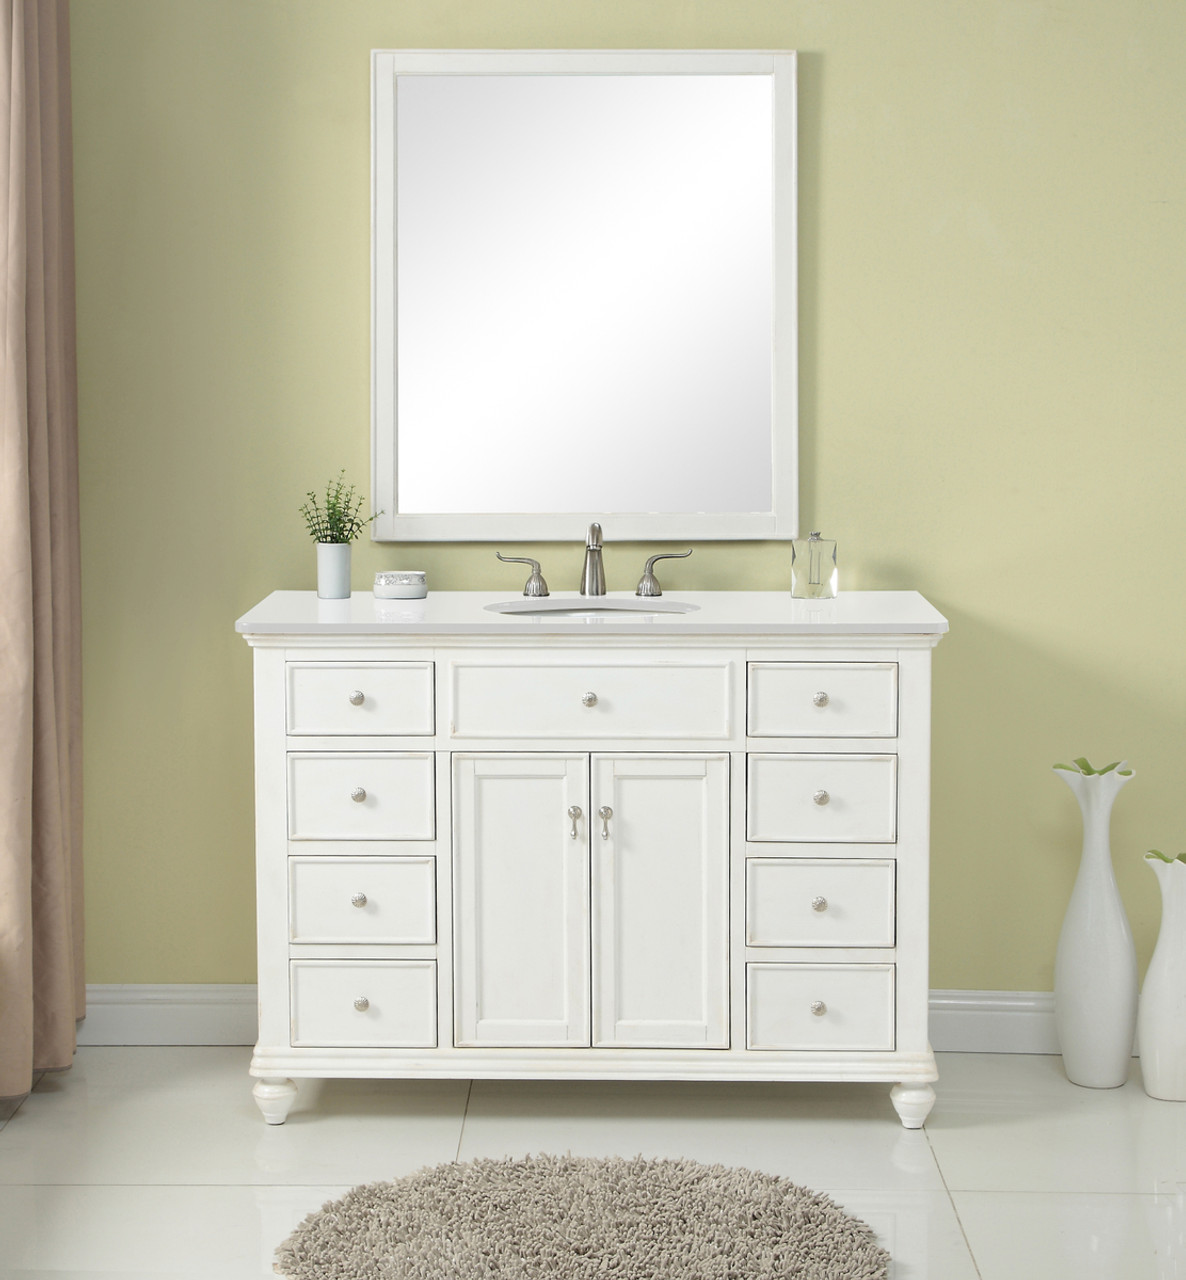 Elegant Kitchen and Bath VF12348AW-VW 48 inch Single Bathroom vanity in Antique White with ivory white engineered marble